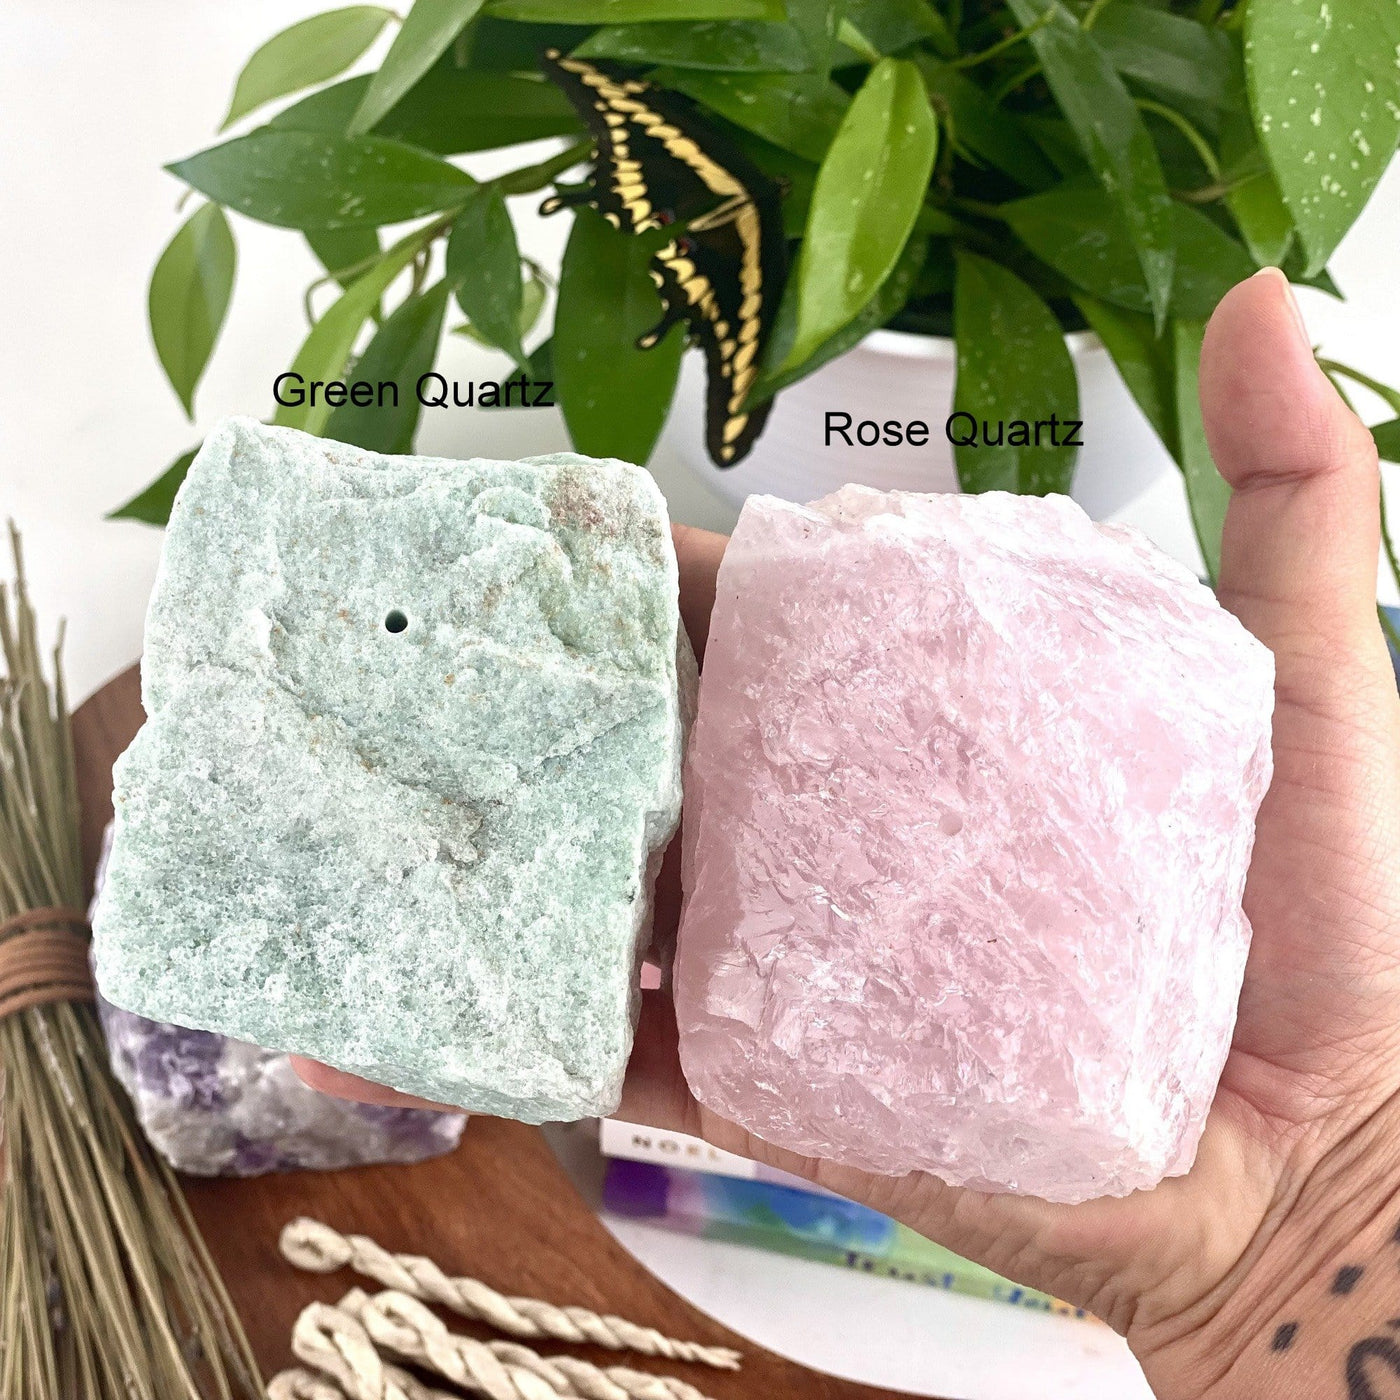 Hand holding 1 green quartz Rough Stone Incense Burner and 1 rose quartz Rough Stone Incense Burner with decorations in the background